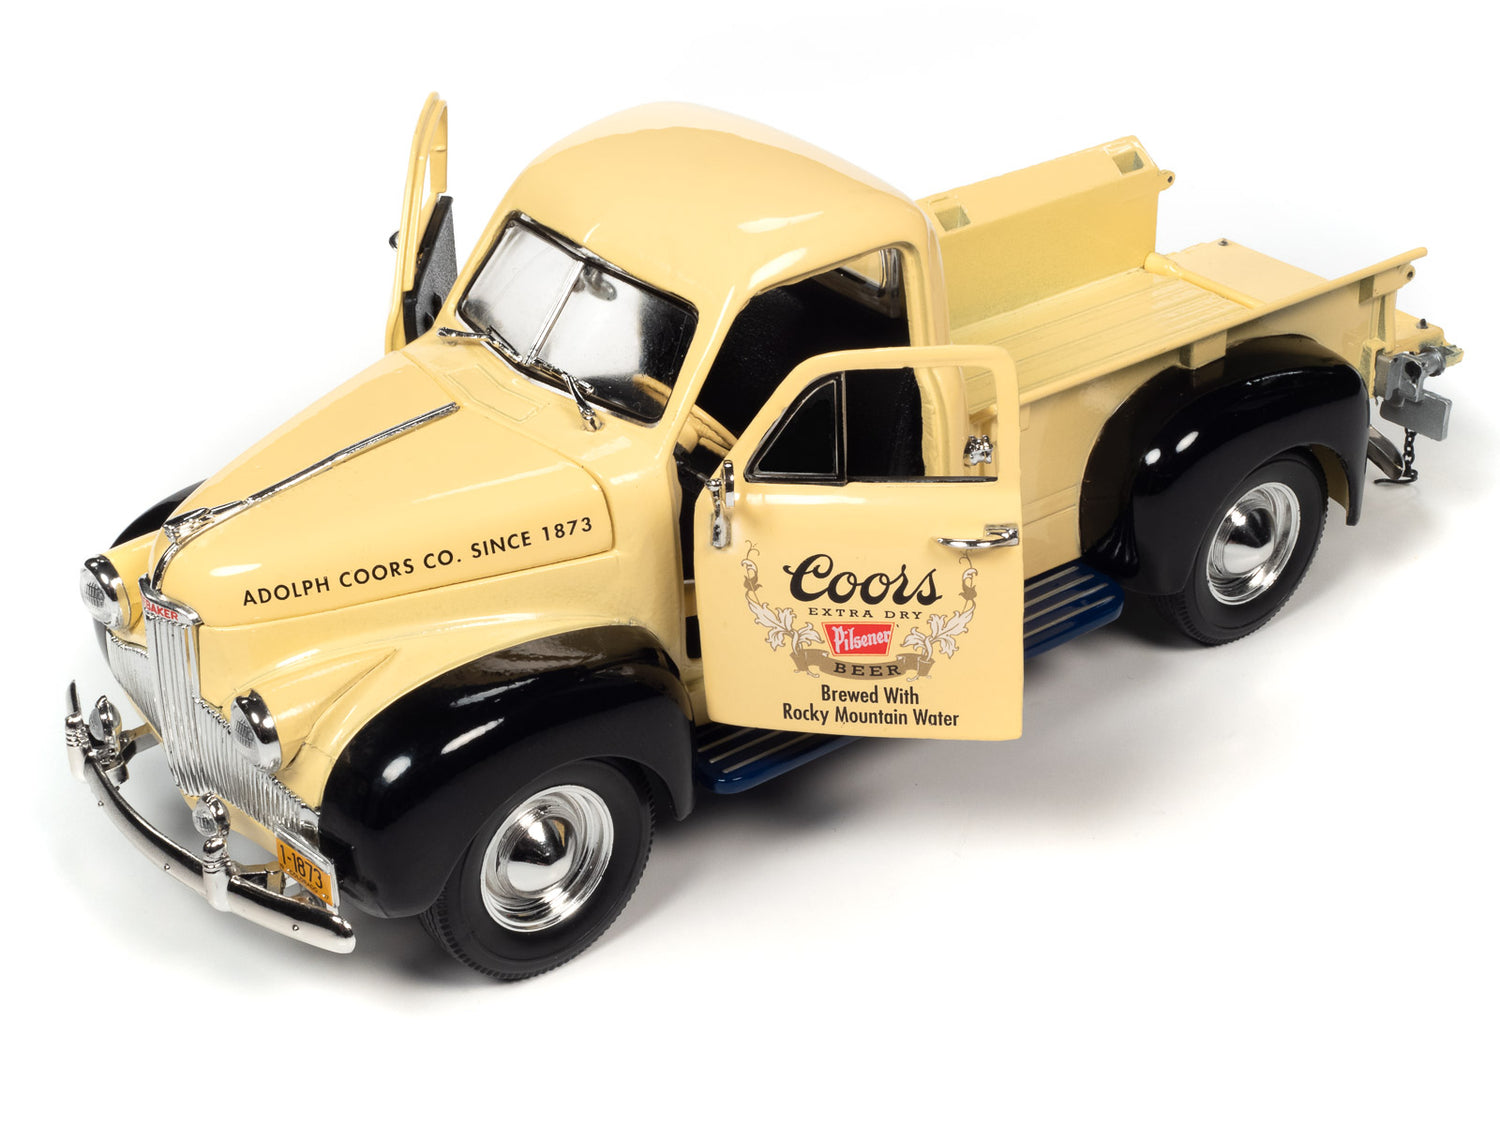 Auto World 1947 Studebaker Pick-up Truck Coors Pilsner 1:24 Scale Diecast